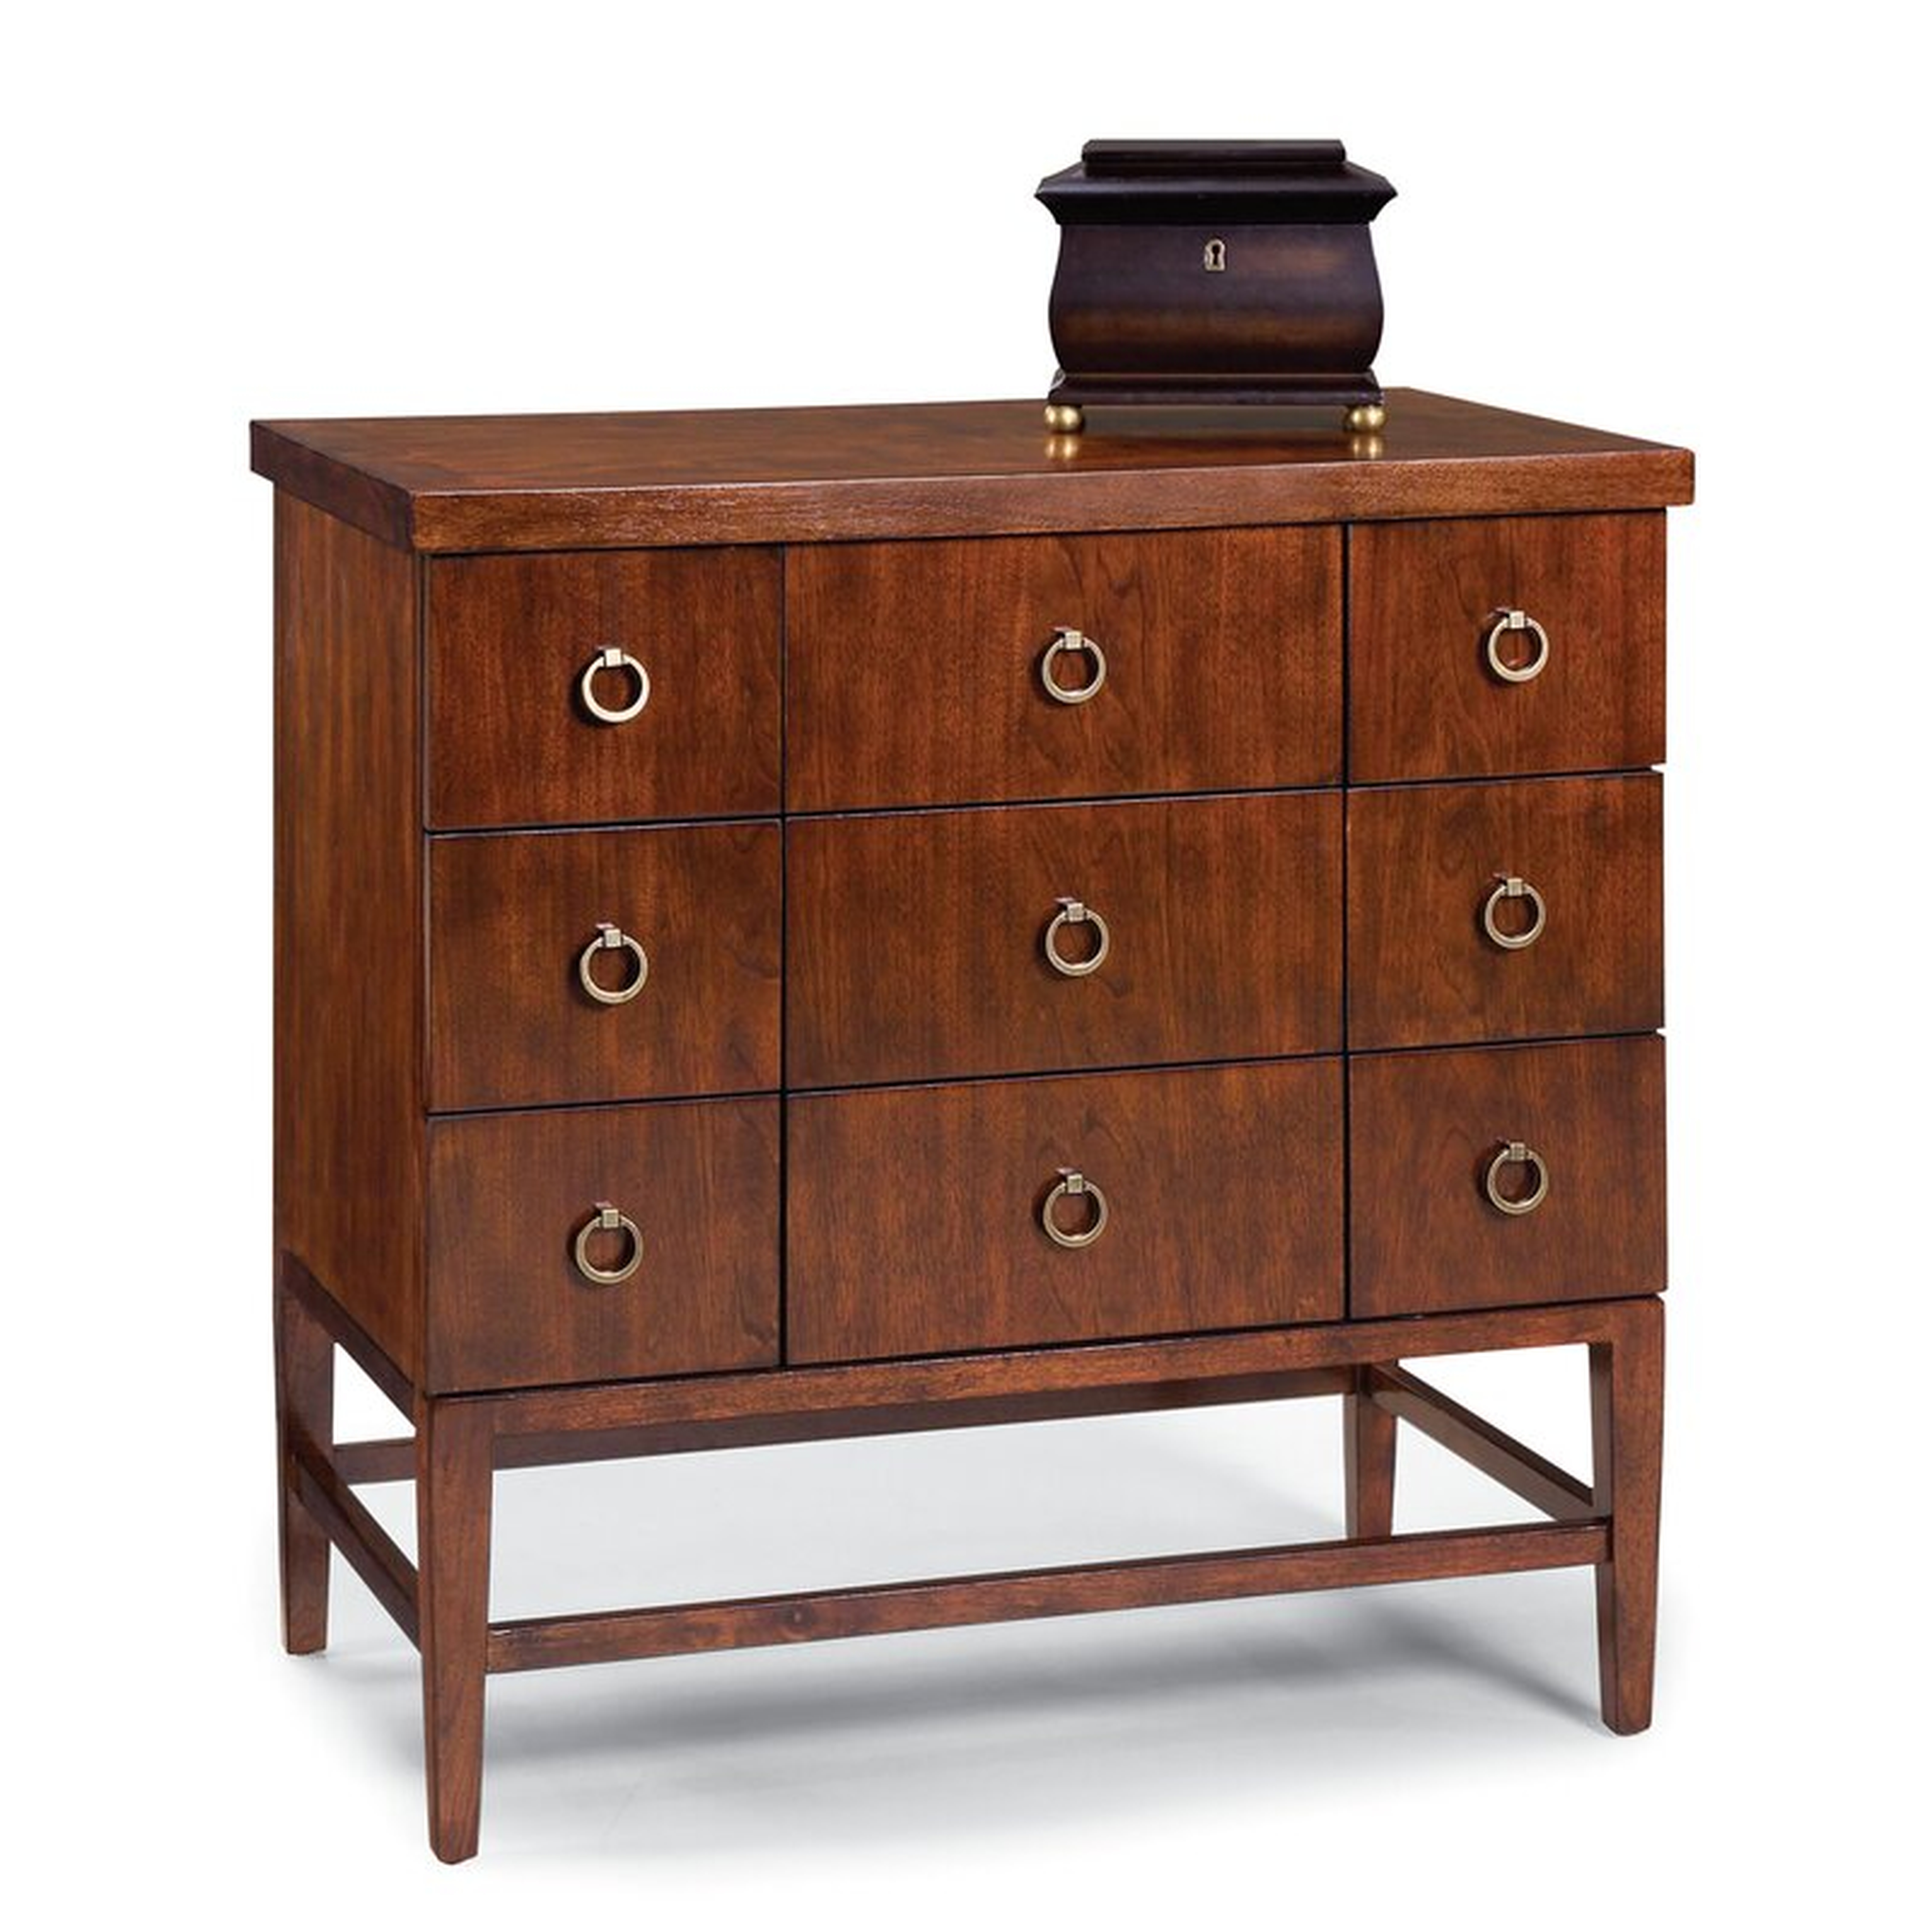 Fairfield Chair Regency 9 Drawer Accent Chest - Perigold